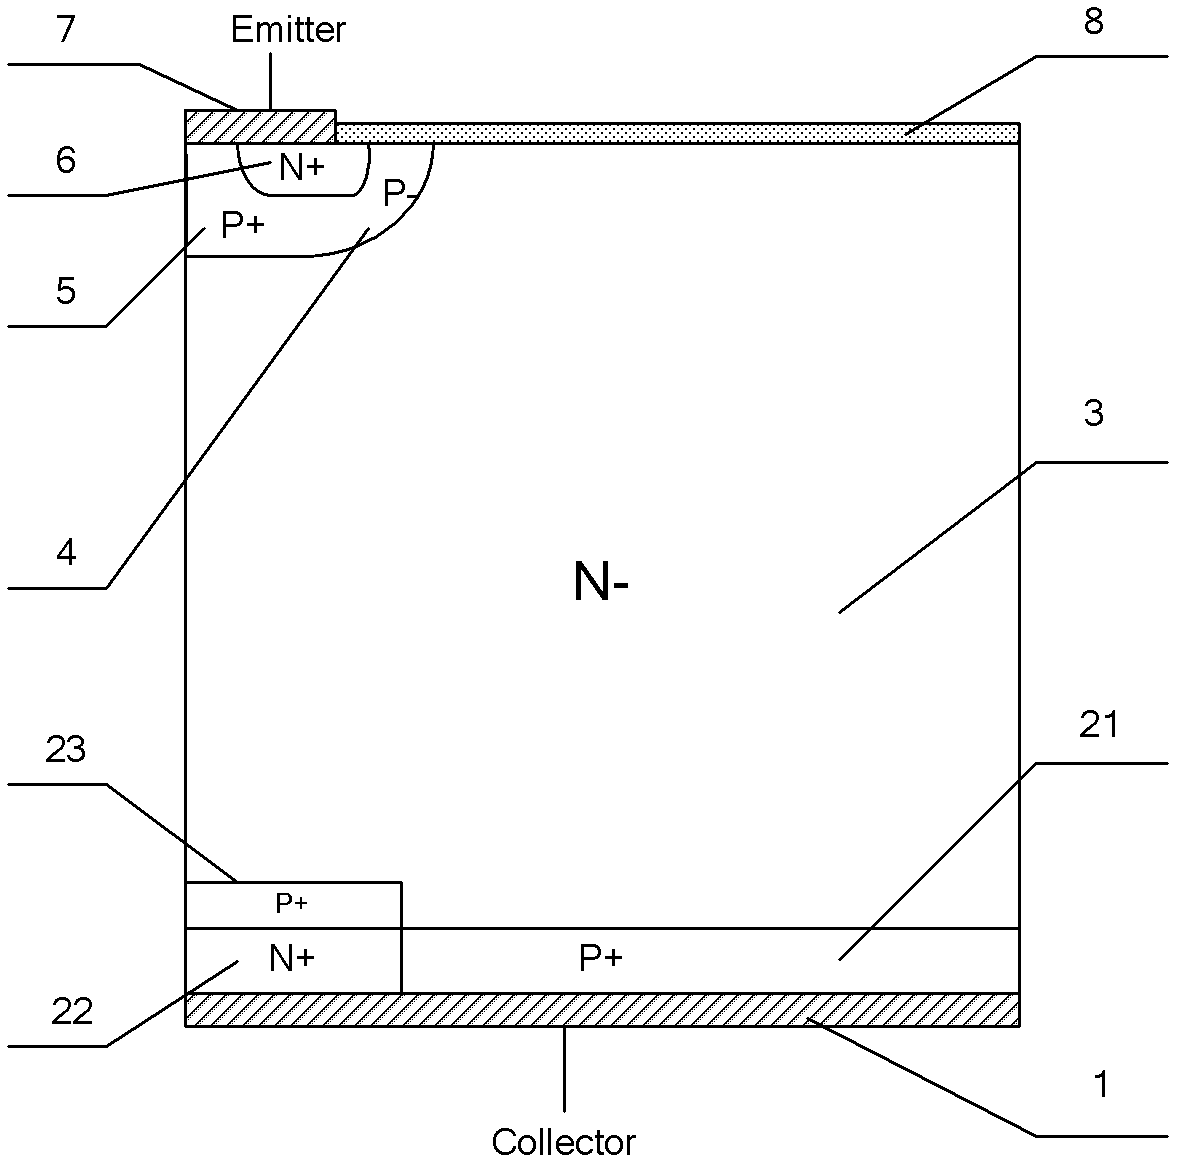 Insulated gate bipolar translator (IGBT) device with two short-circuit positive electrodes